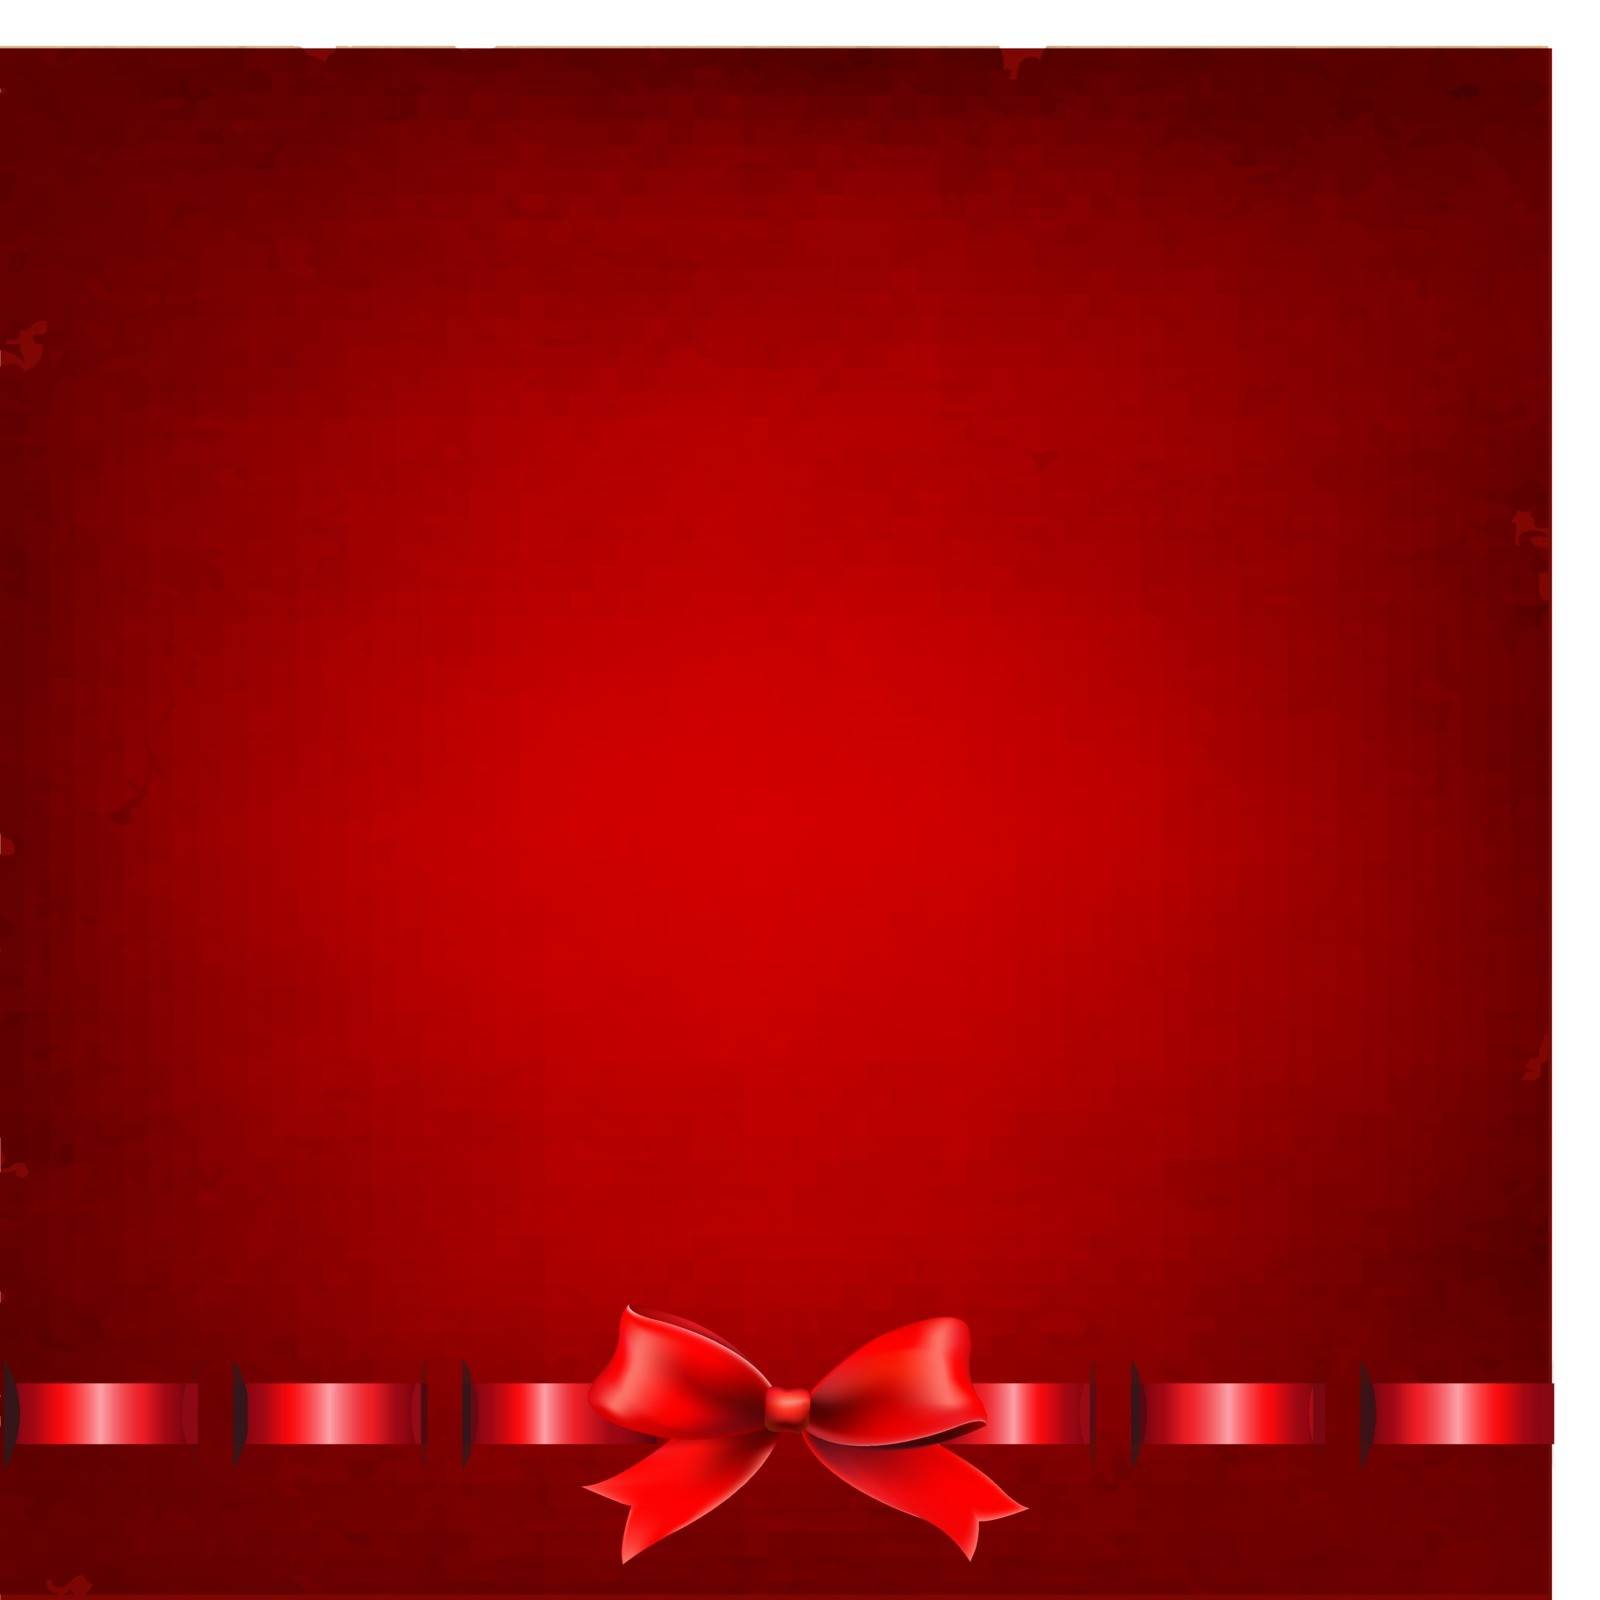 Red Background With Red Ribbon by cammep